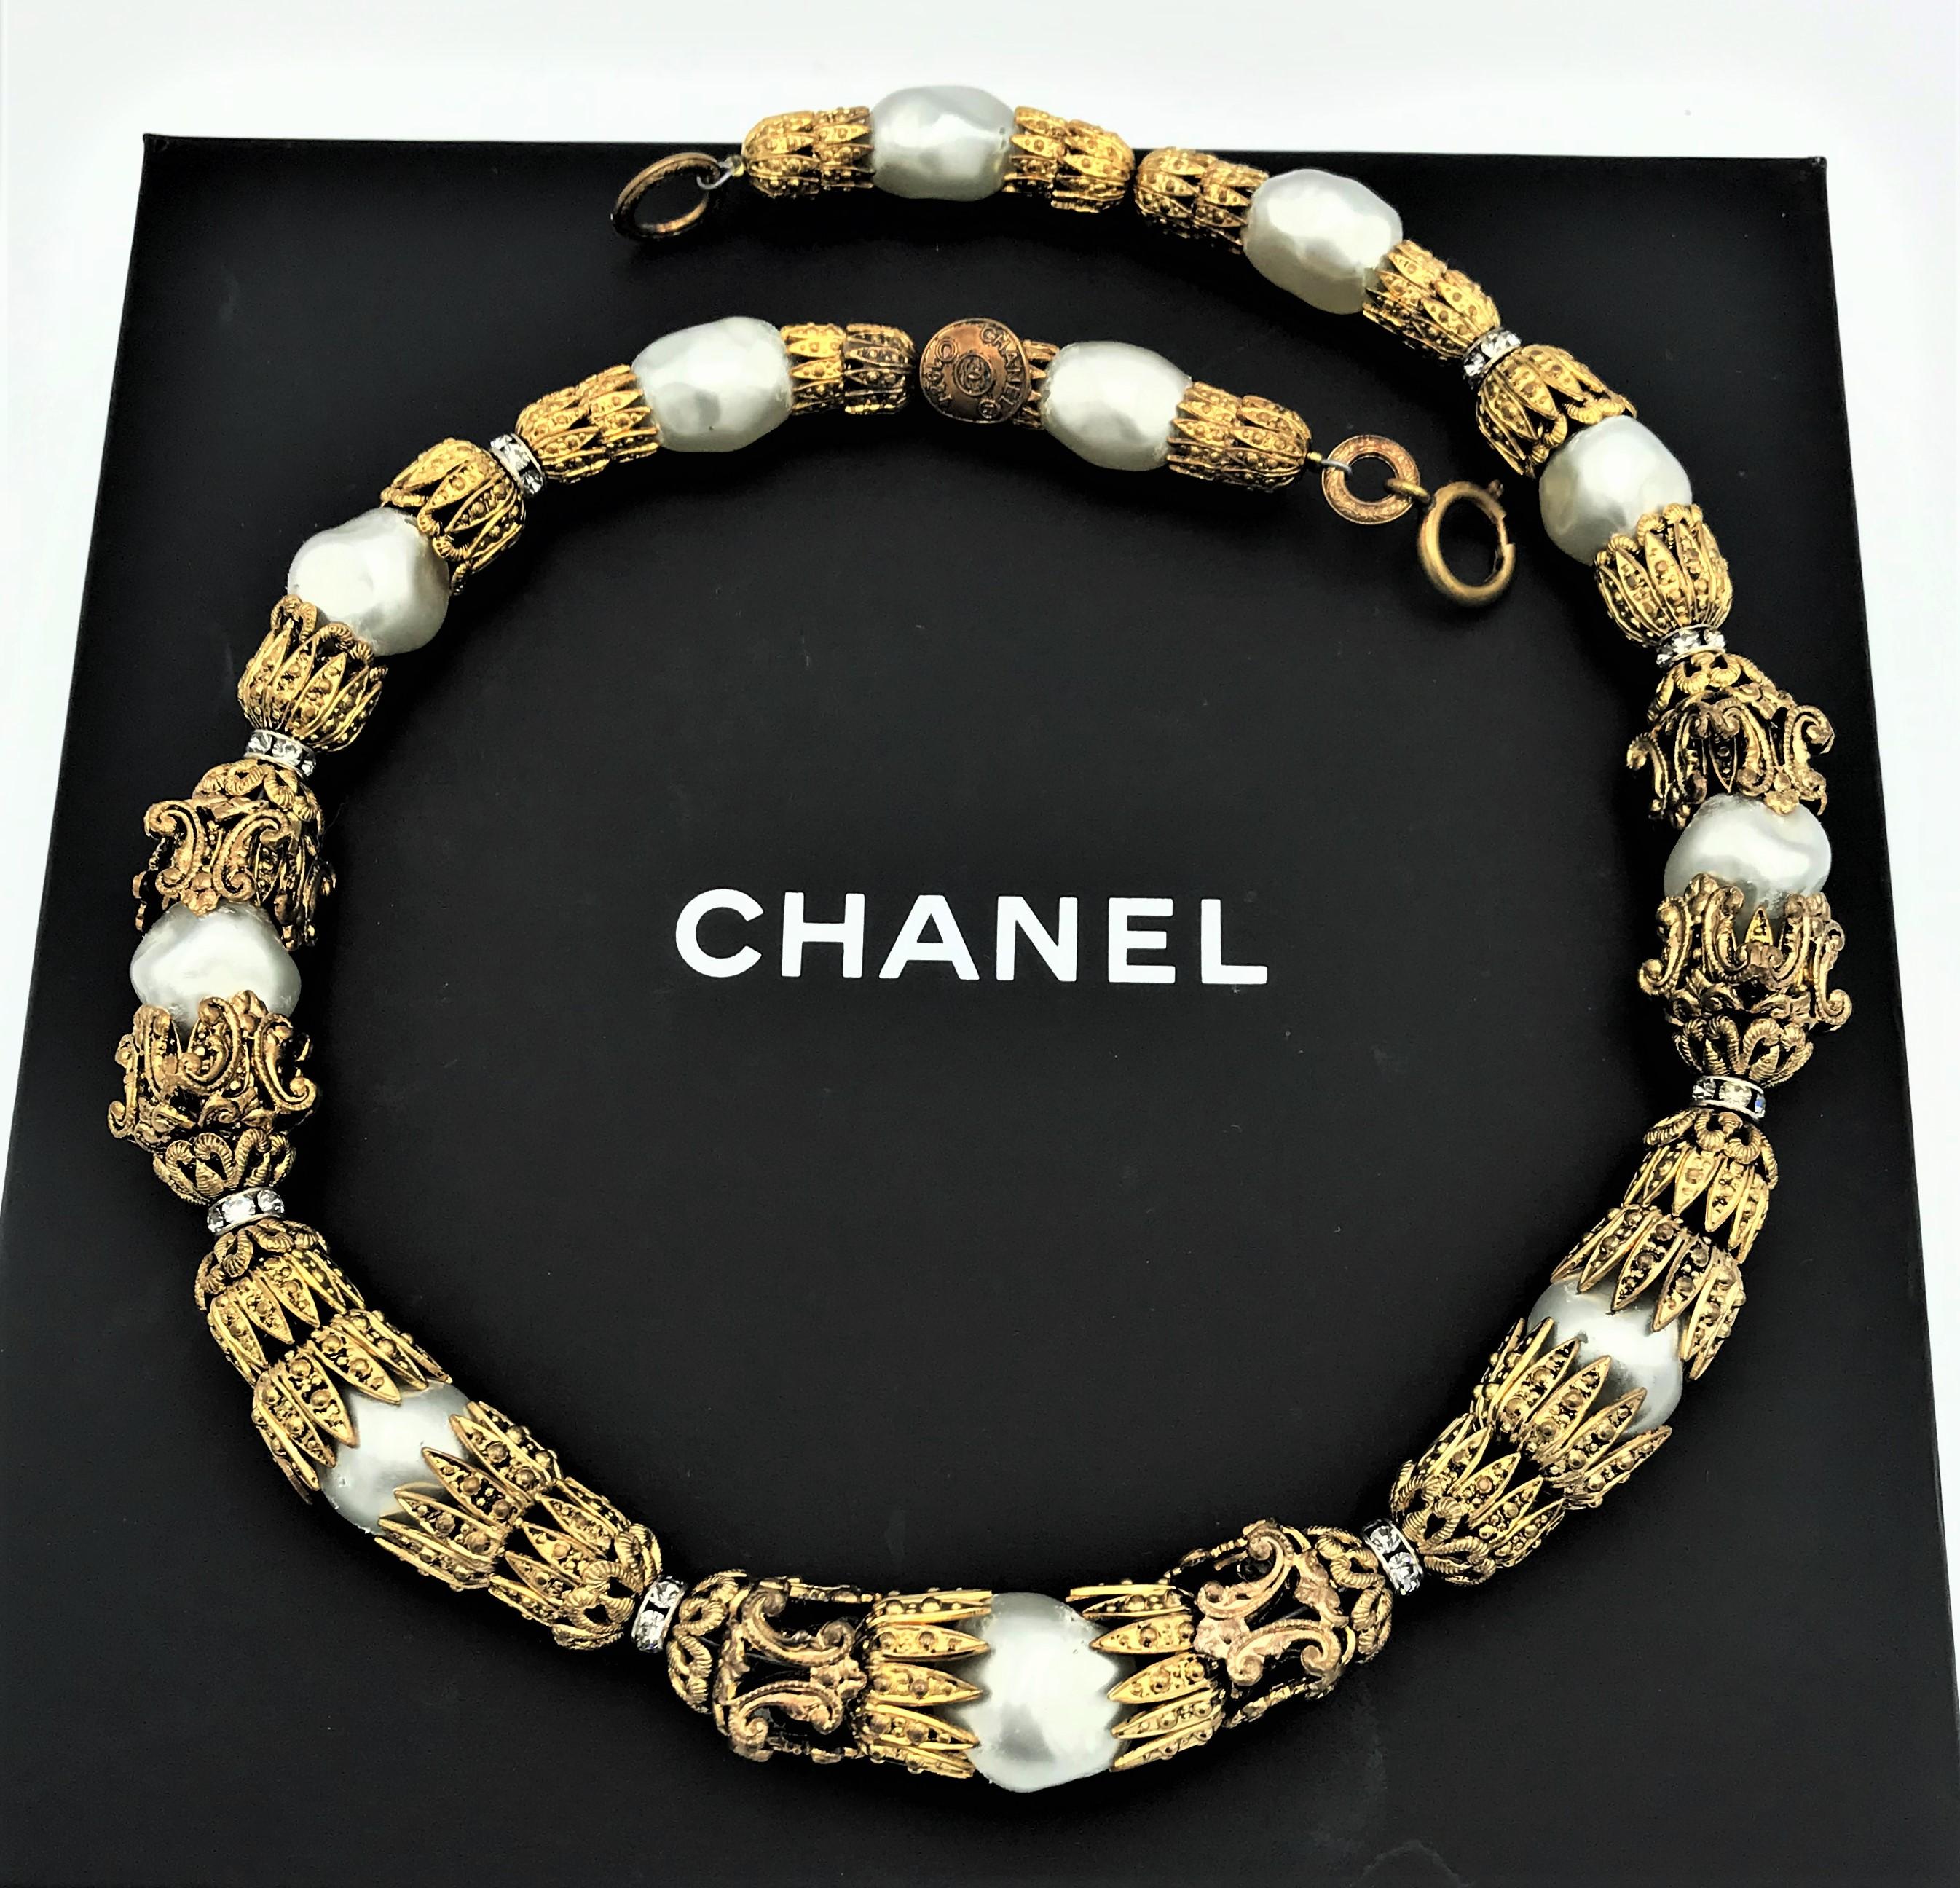 Vintage CHANEL Byzantine style necklace with baroque pearls, signed, Book piece. 1